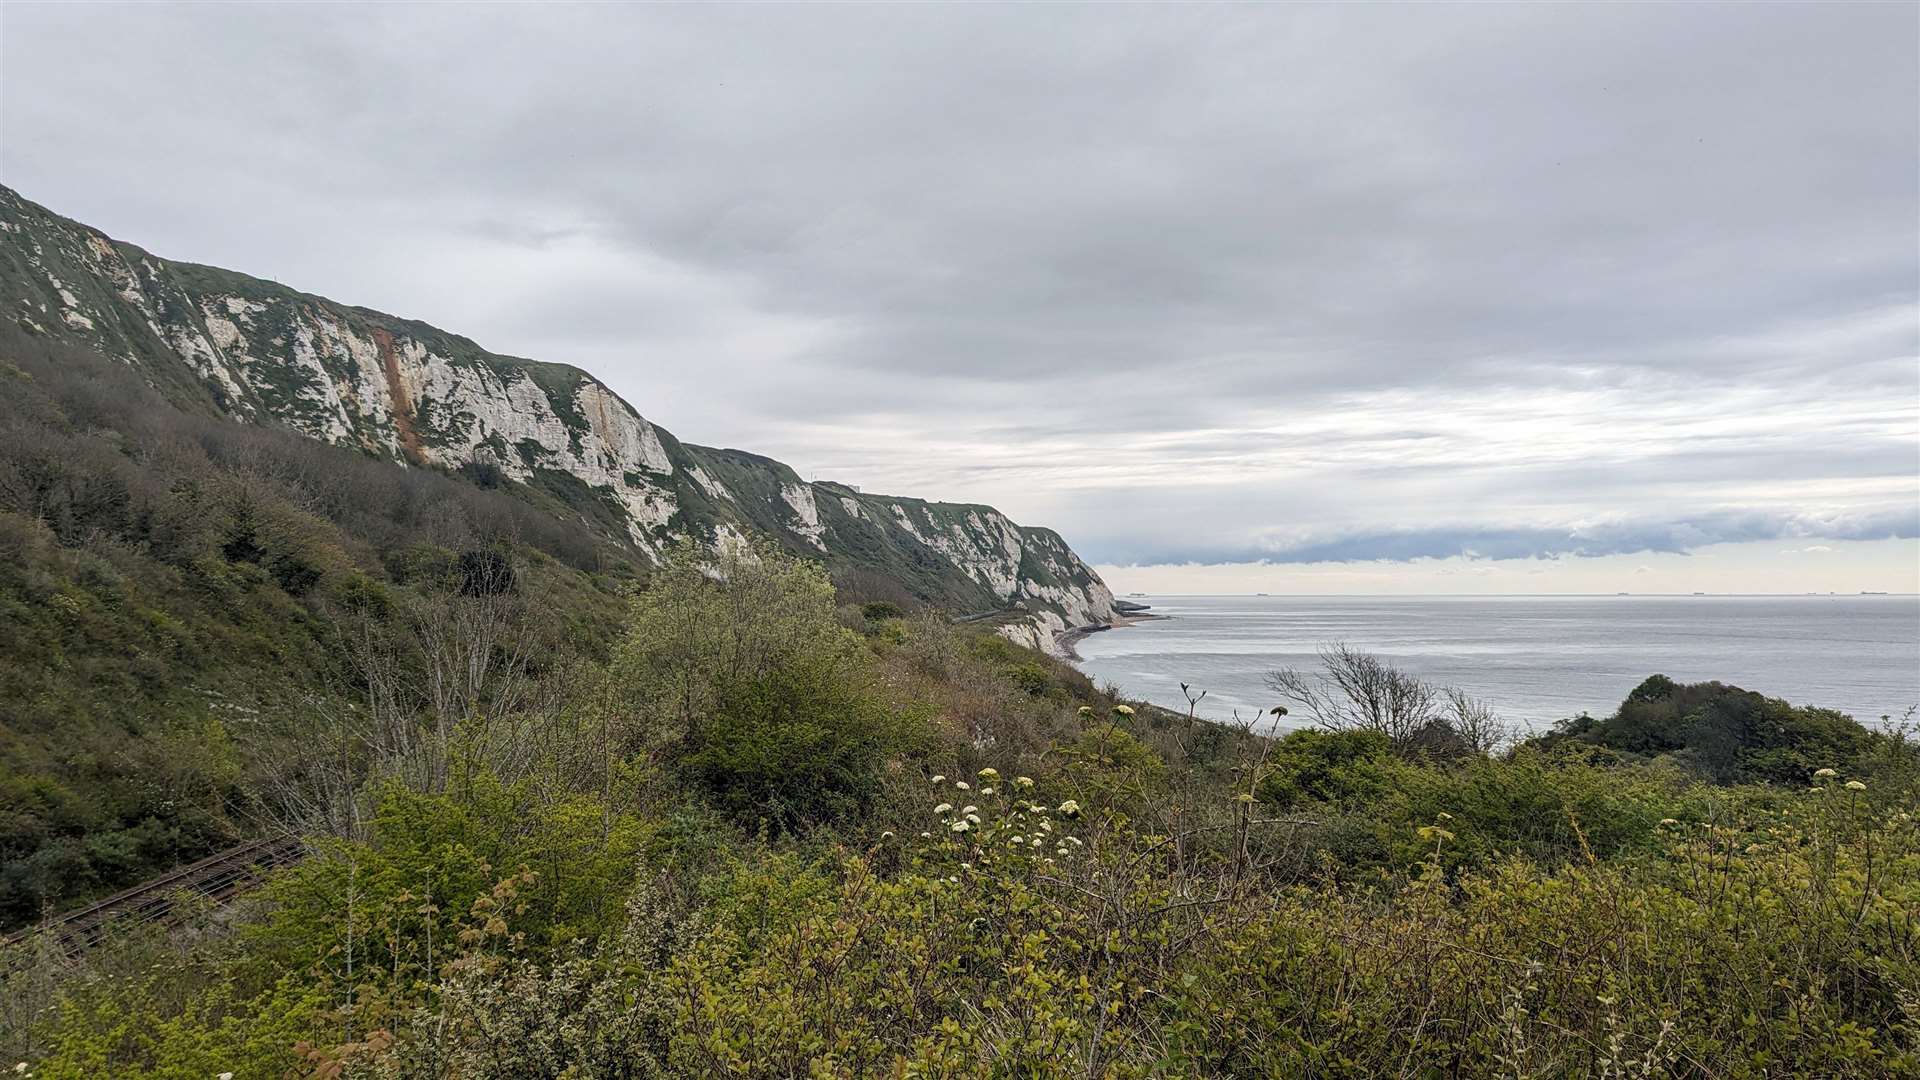 The railway line at the Warren runs between the sea and the cliffs